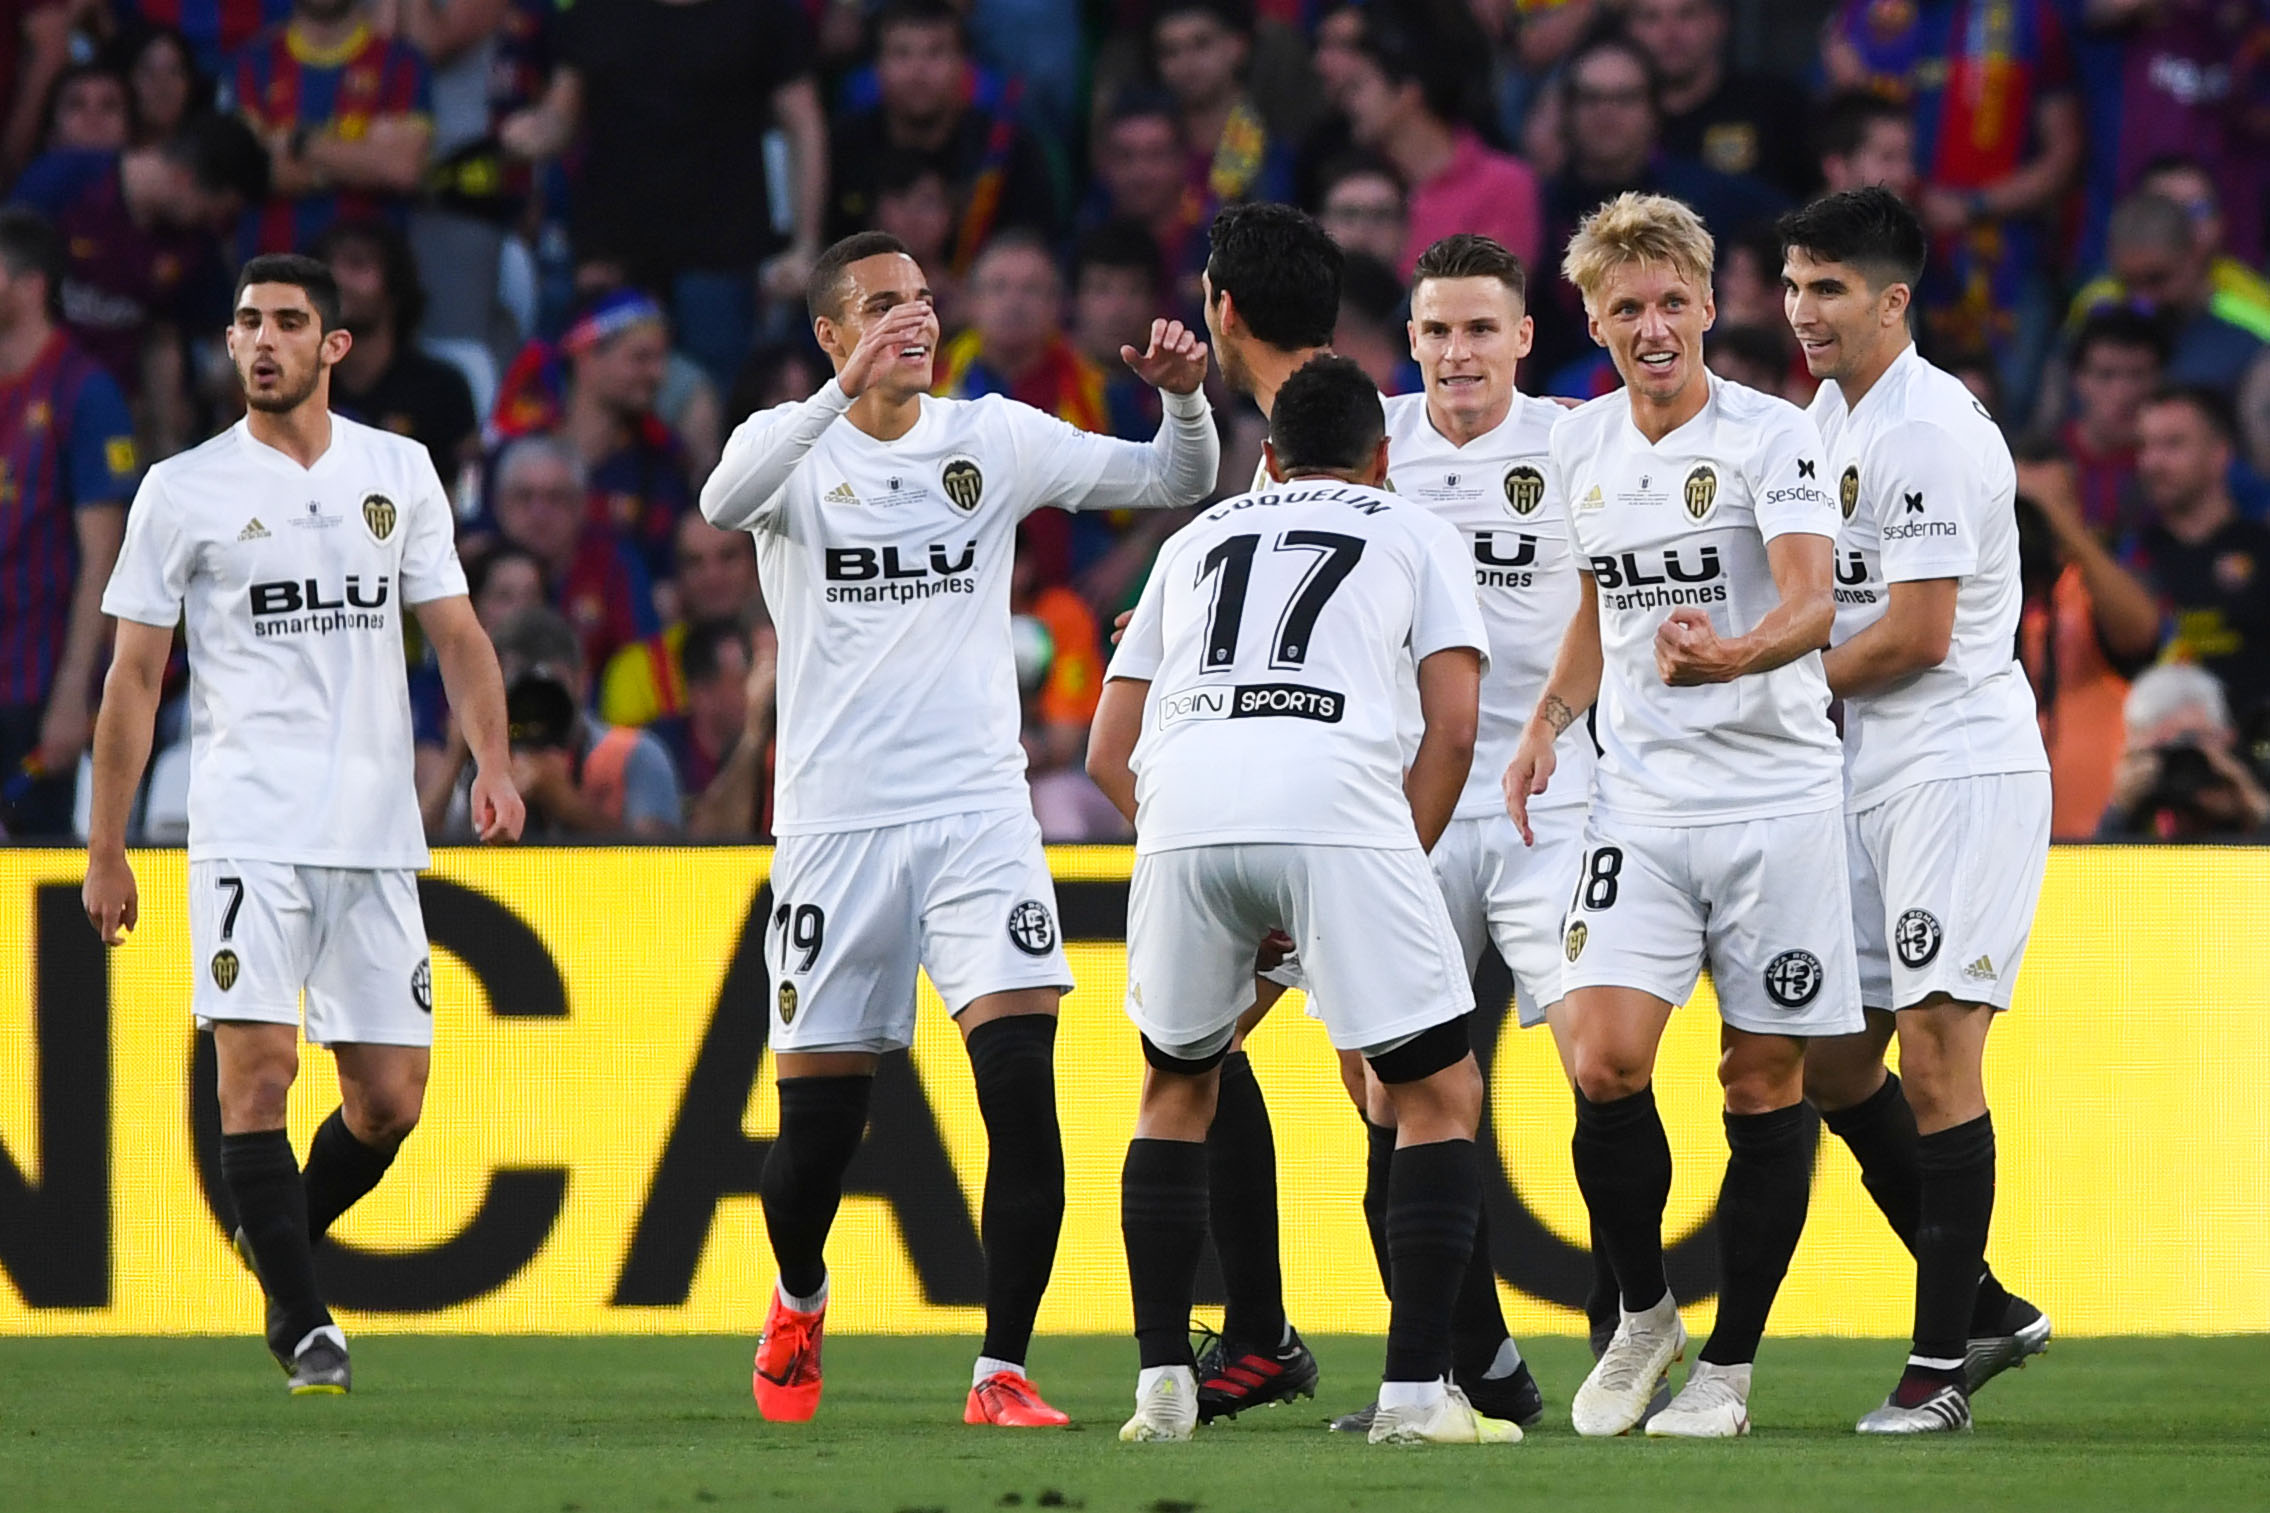 SEVILLE, SPAIN - MAY 25: Kevin Gameiro of Valencia CF celebrates with his team mates after scoring his team's first goal during the Spanish Copa del Rey match between Barcelona and Valencia at Estadio Benito Villamarin on May 25, 2019 in Seville, . (Photo by Alex Caparros/Getty Images)